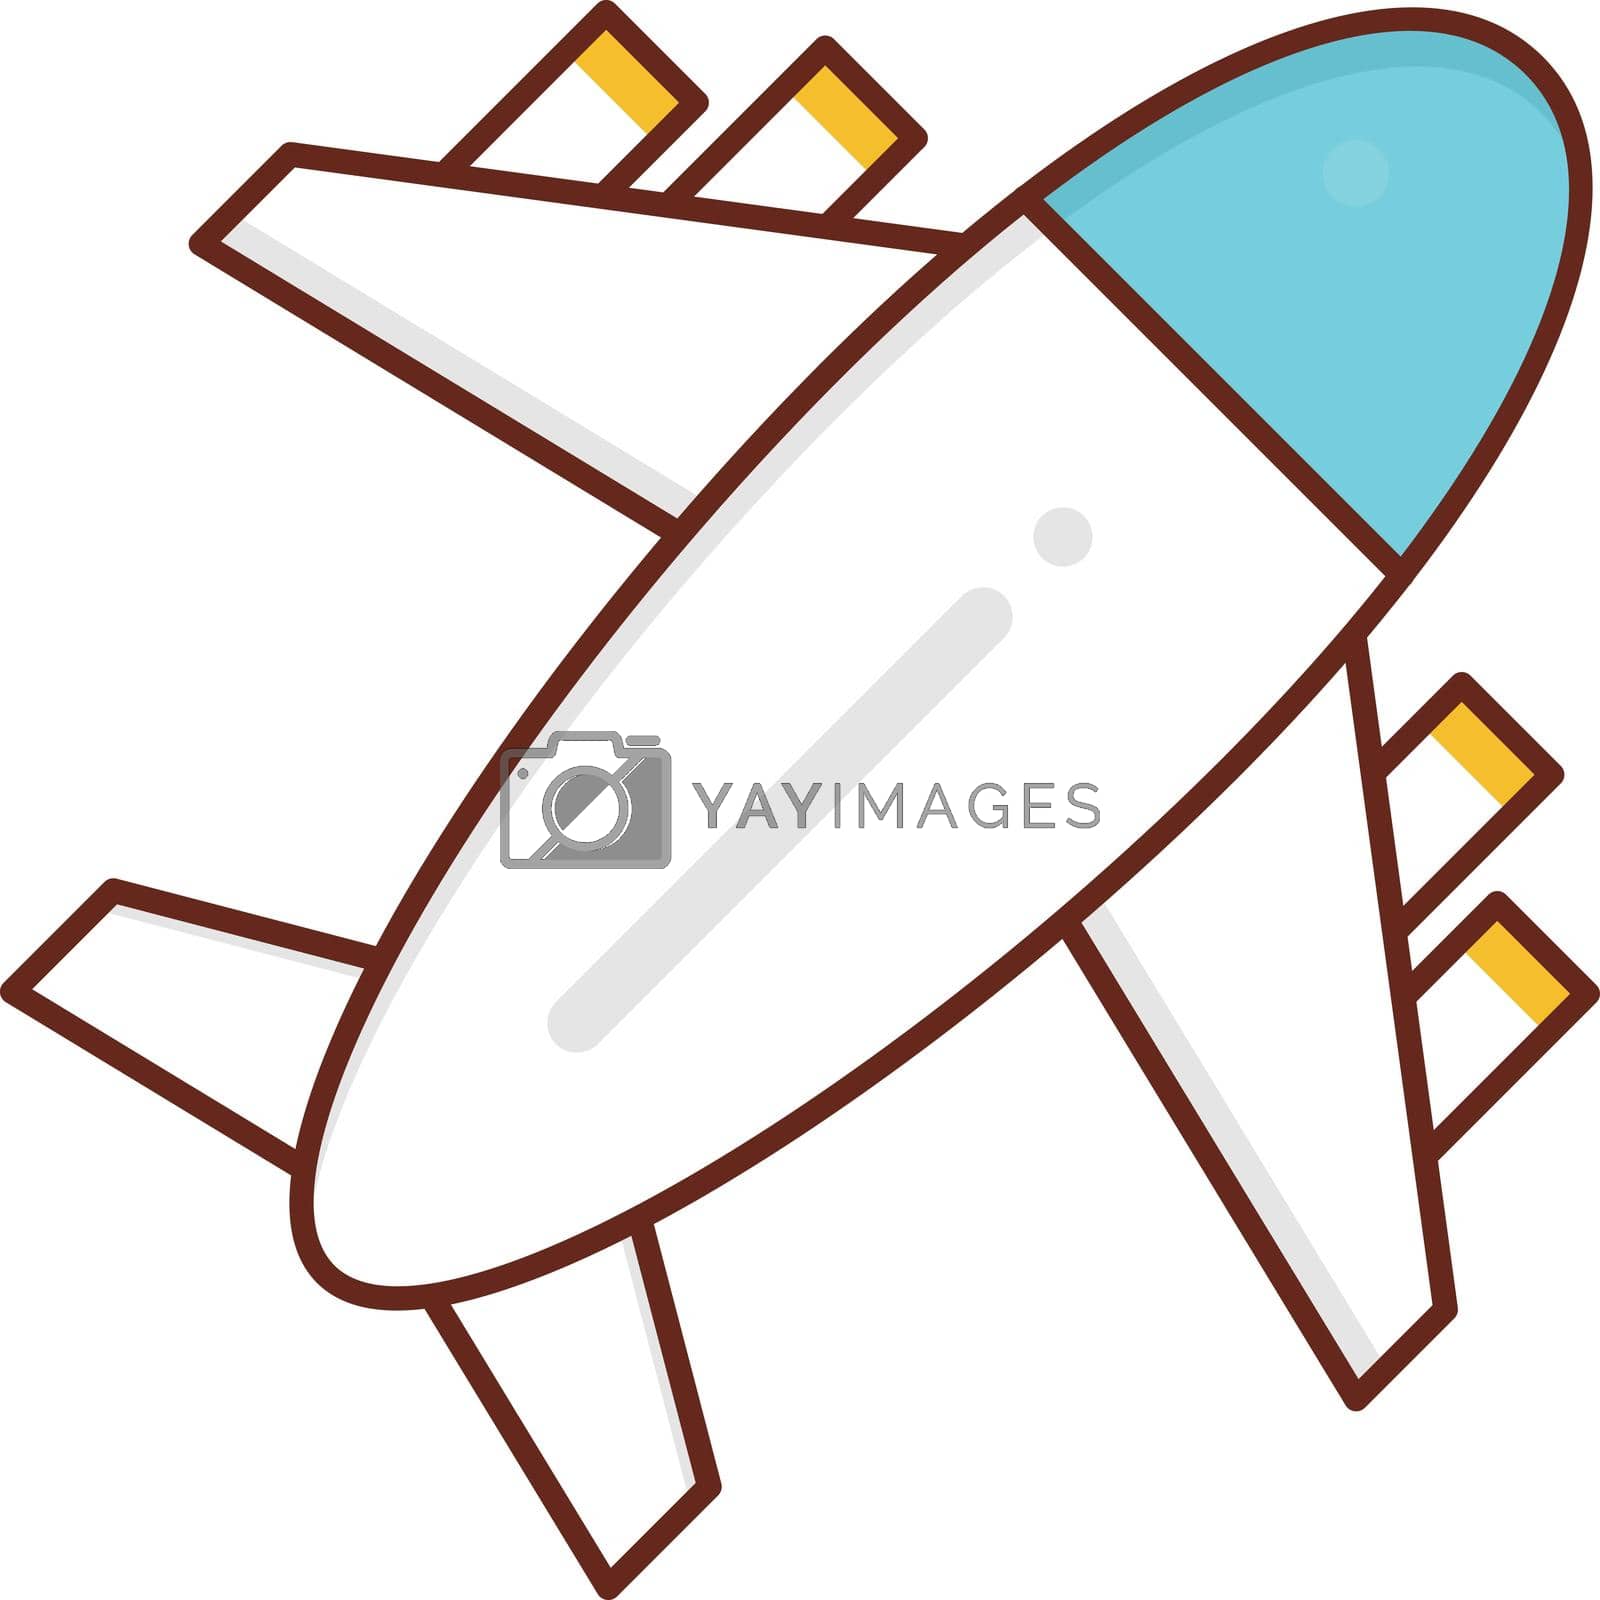 Royalty free image of airplane by FlaticonsDesign